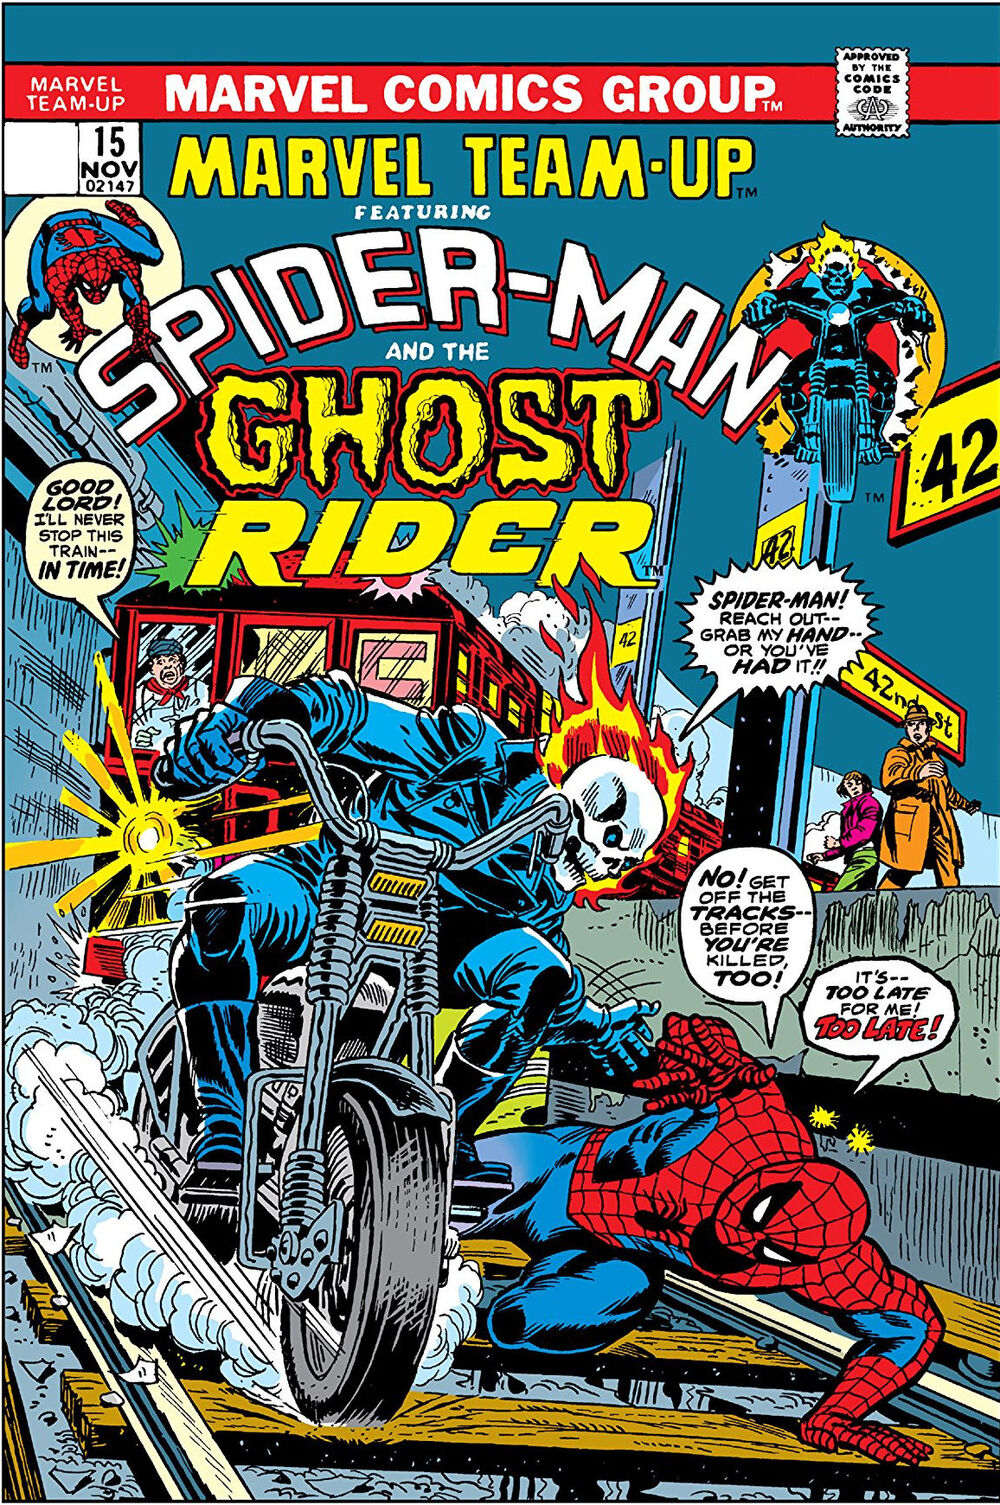 Marvel Team-Up Featuring: Spider-Man And The Ghost Rider Volume 1 #15